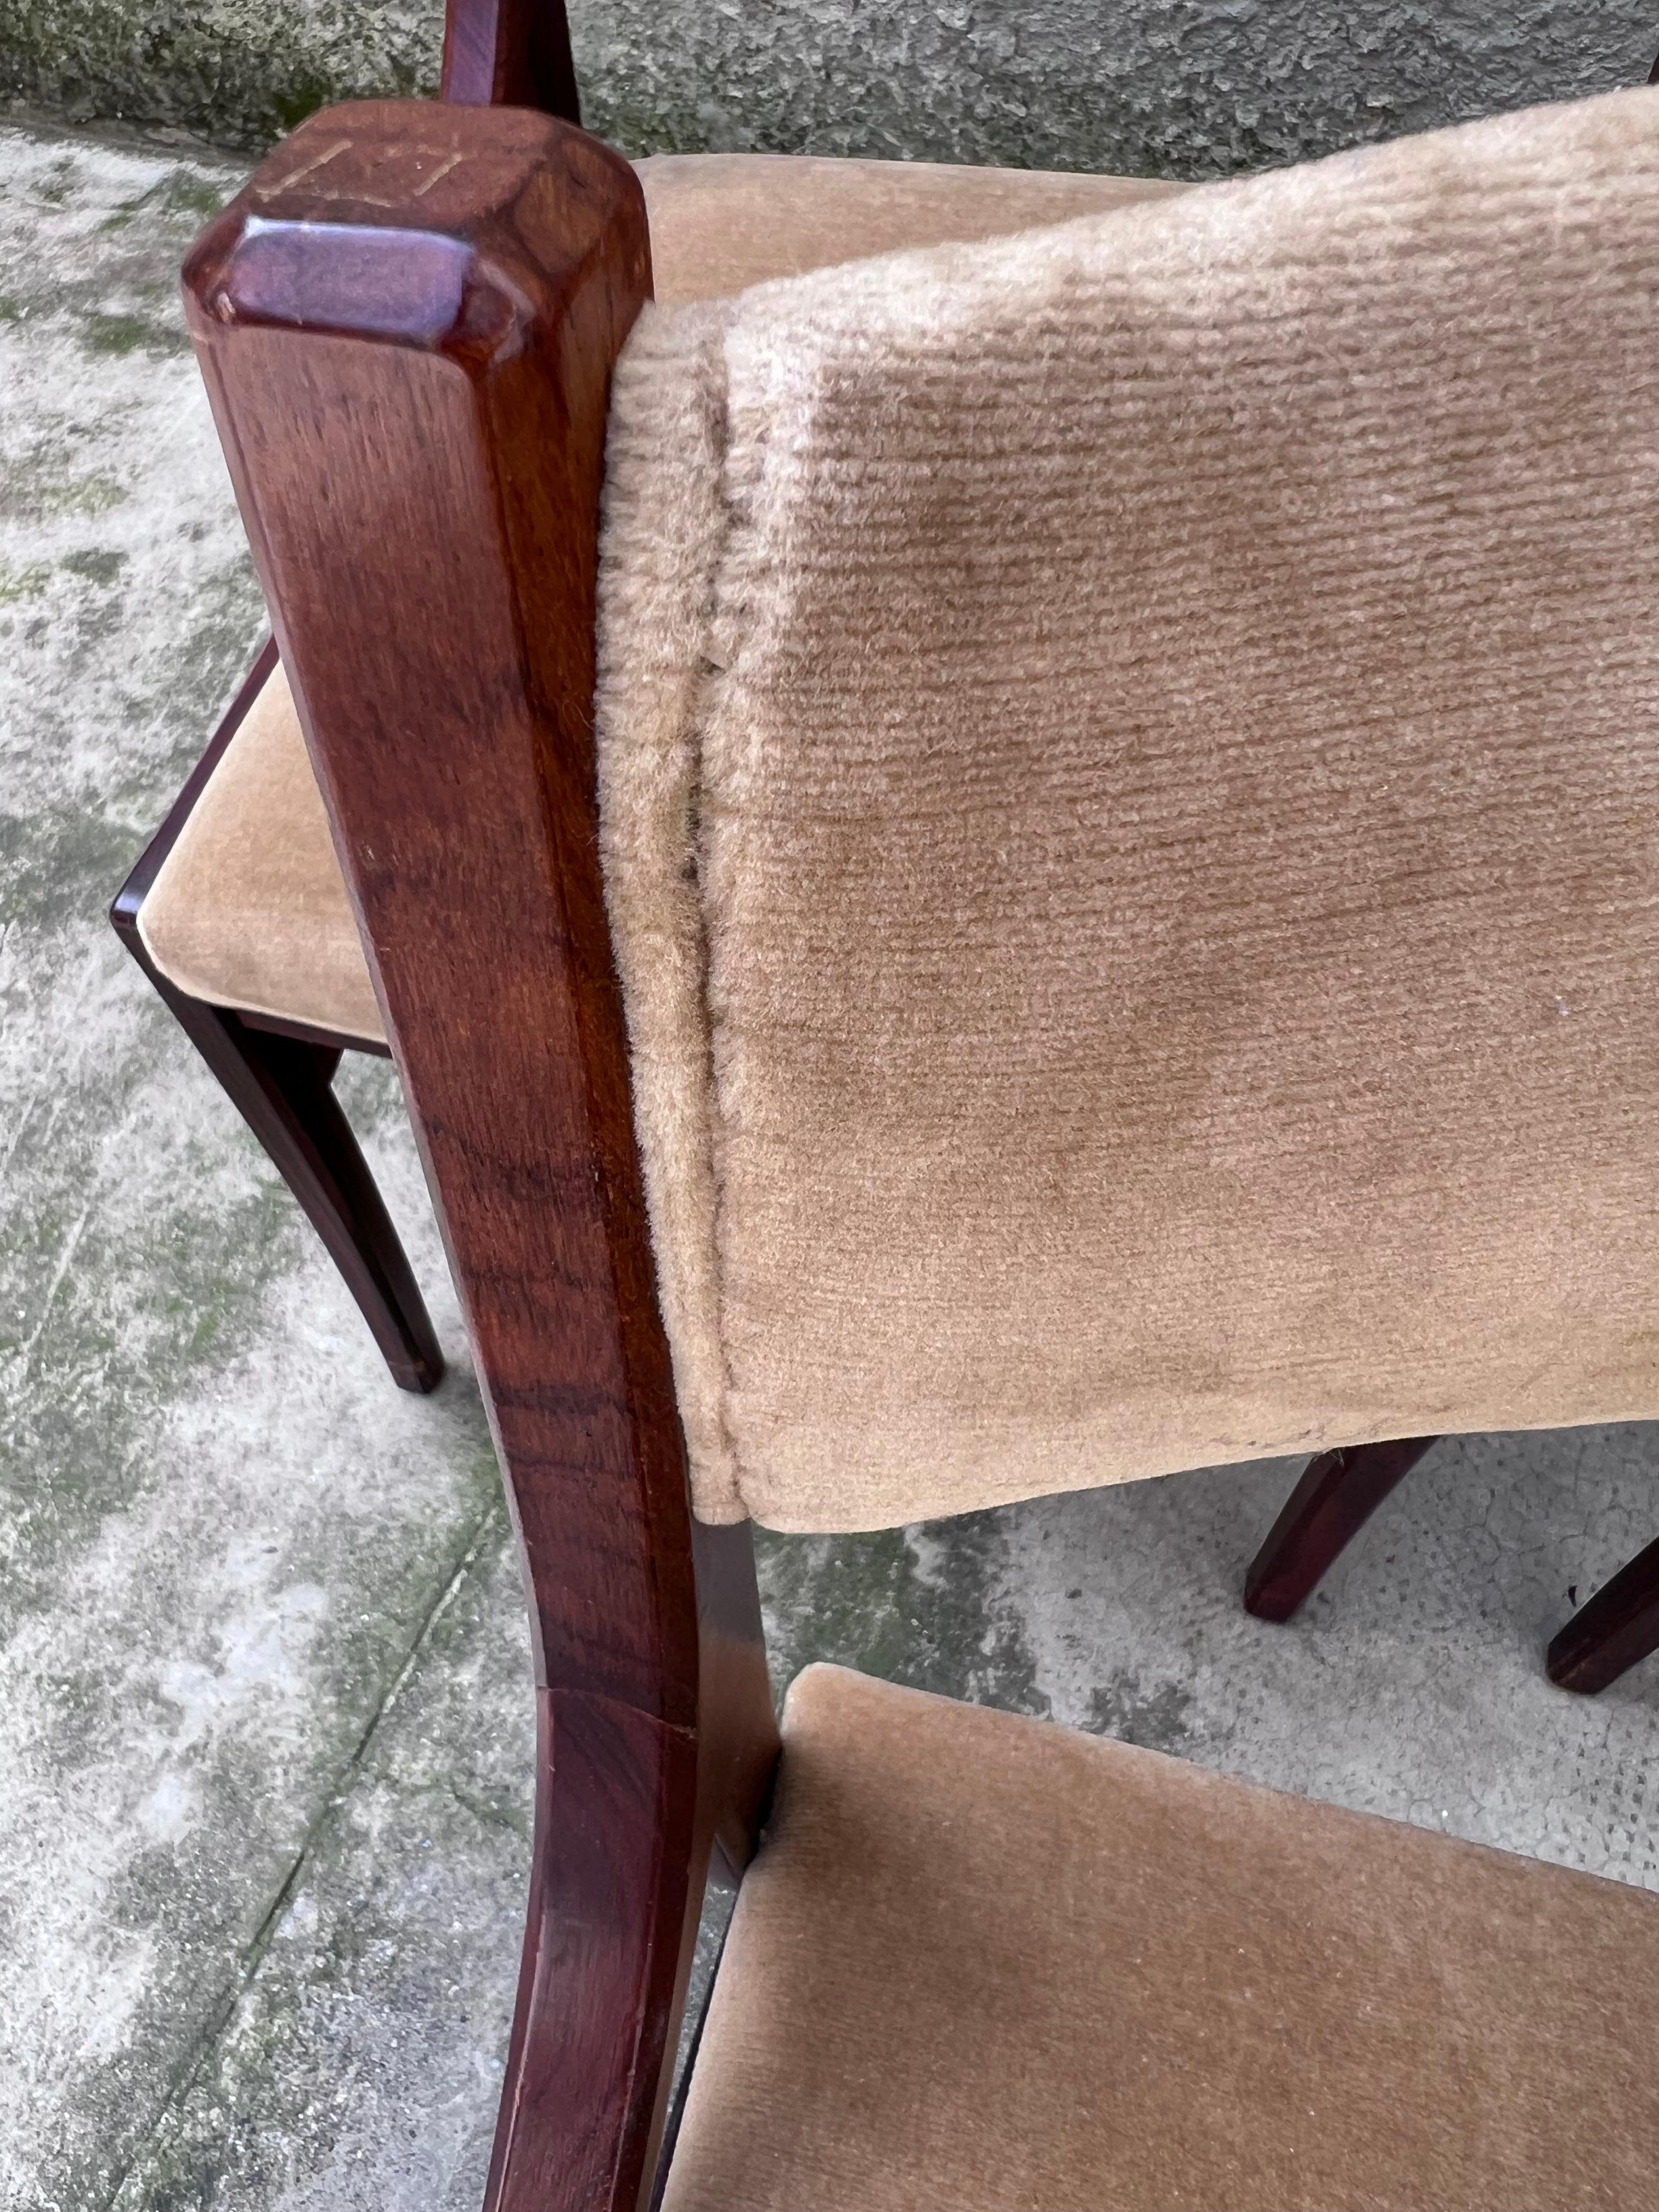 Set of Six Mahogany Chairs Mod.110 by Ico Parisi for Cassina - Italy - 1960s For Sale 2